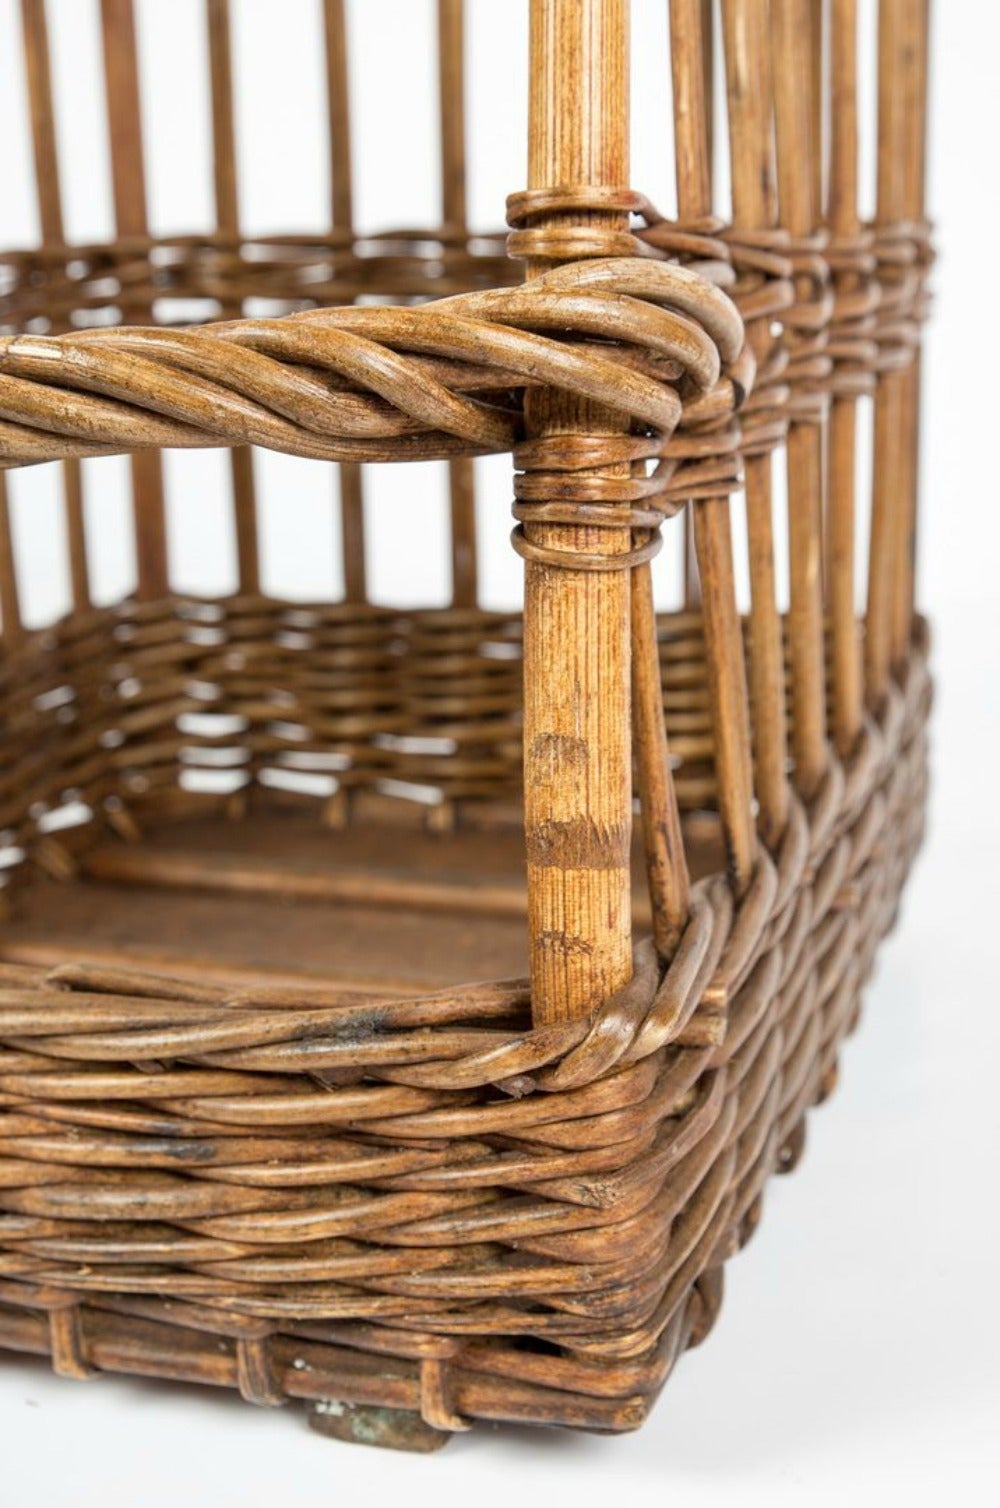 Willow Short Open-Sided French Baguette Basket